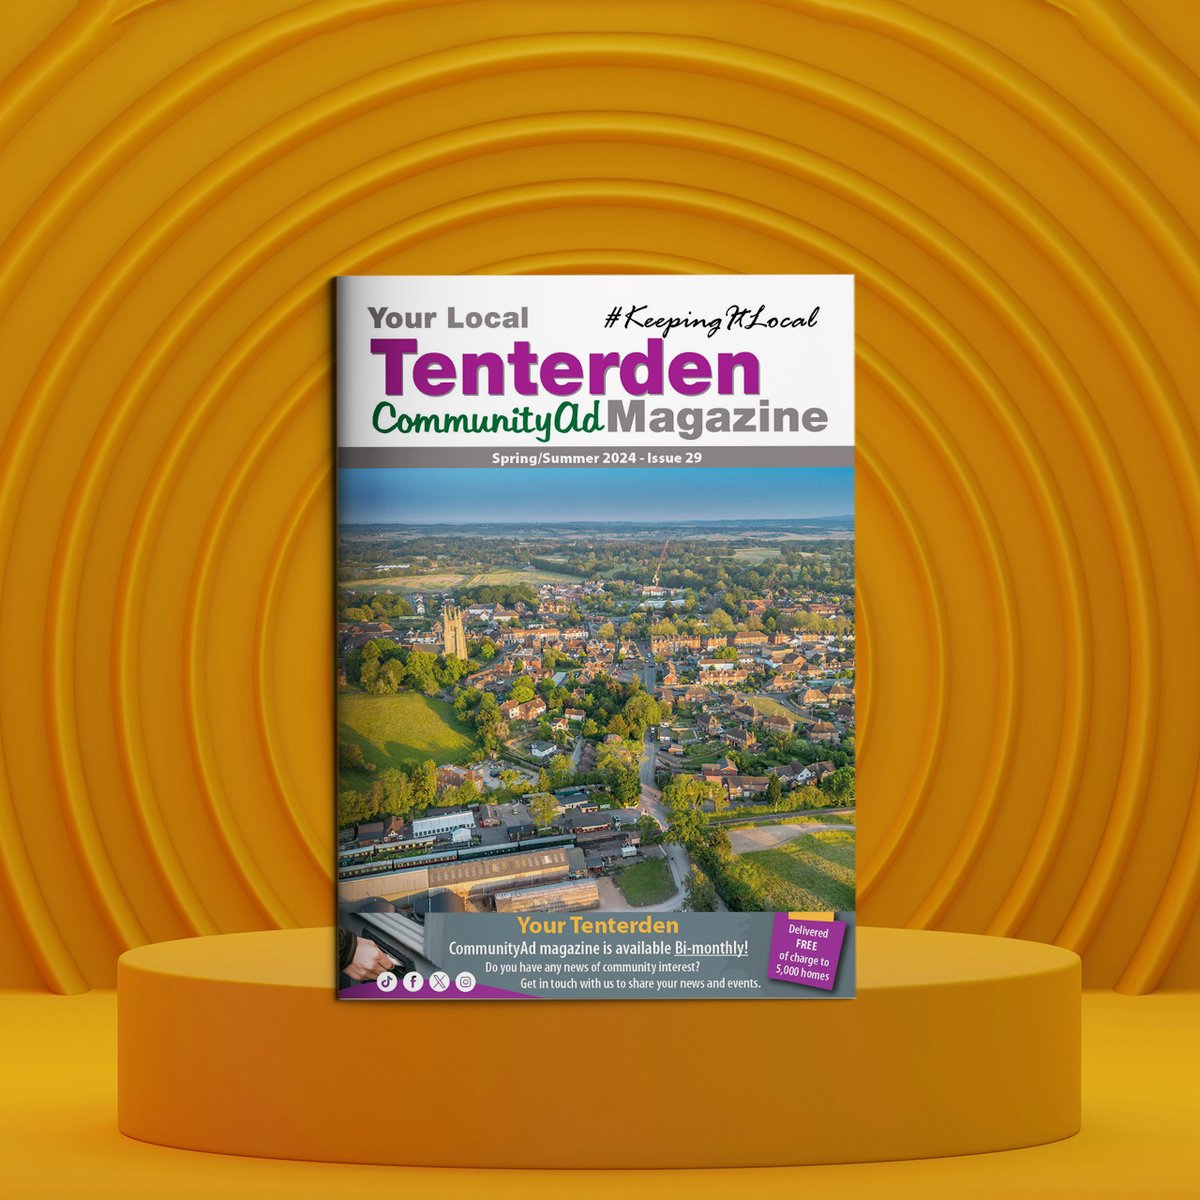 The new Tenterden #CommunityAd Magazine is here! Dive in to connect with your town, discover local stories, events, and more. Let’s celebrate and support our vibrant community in Kent together. communityad.co.uk/back-issues/te… #Tenterden #Community #Kent #news #events #story #storytime